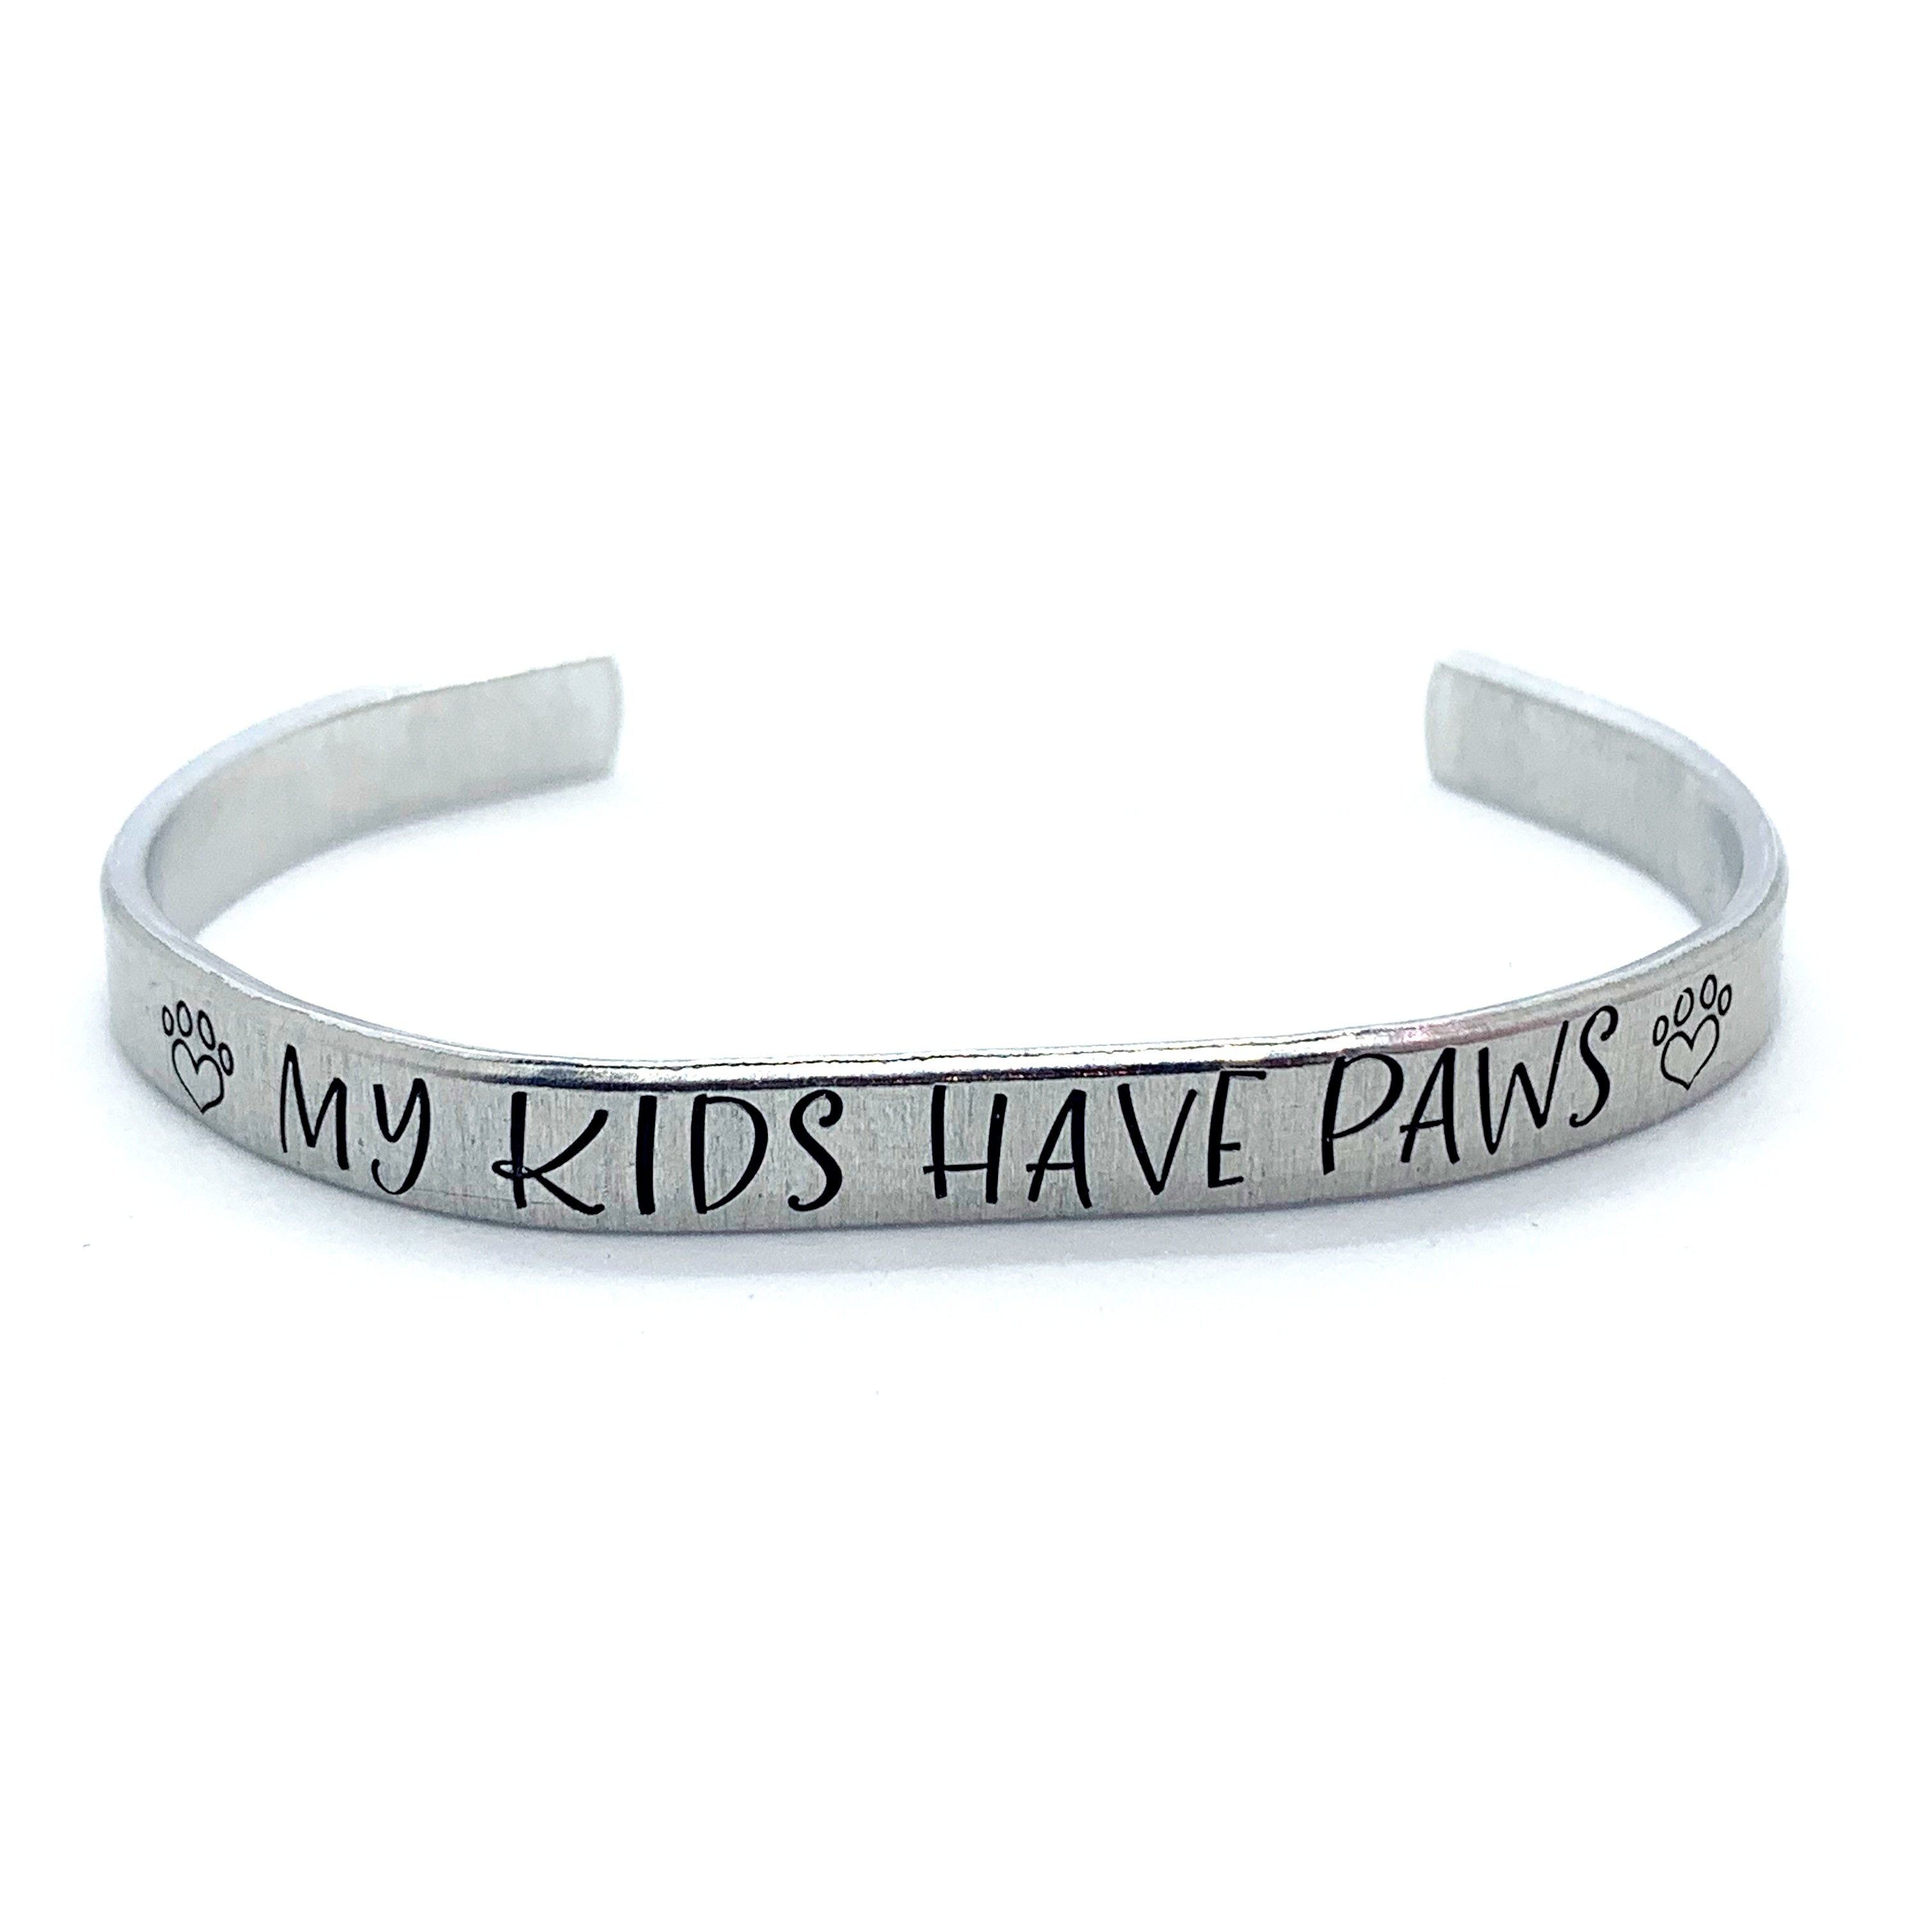 ¼ inch Aluminum Cuff - My Kids Have Paws